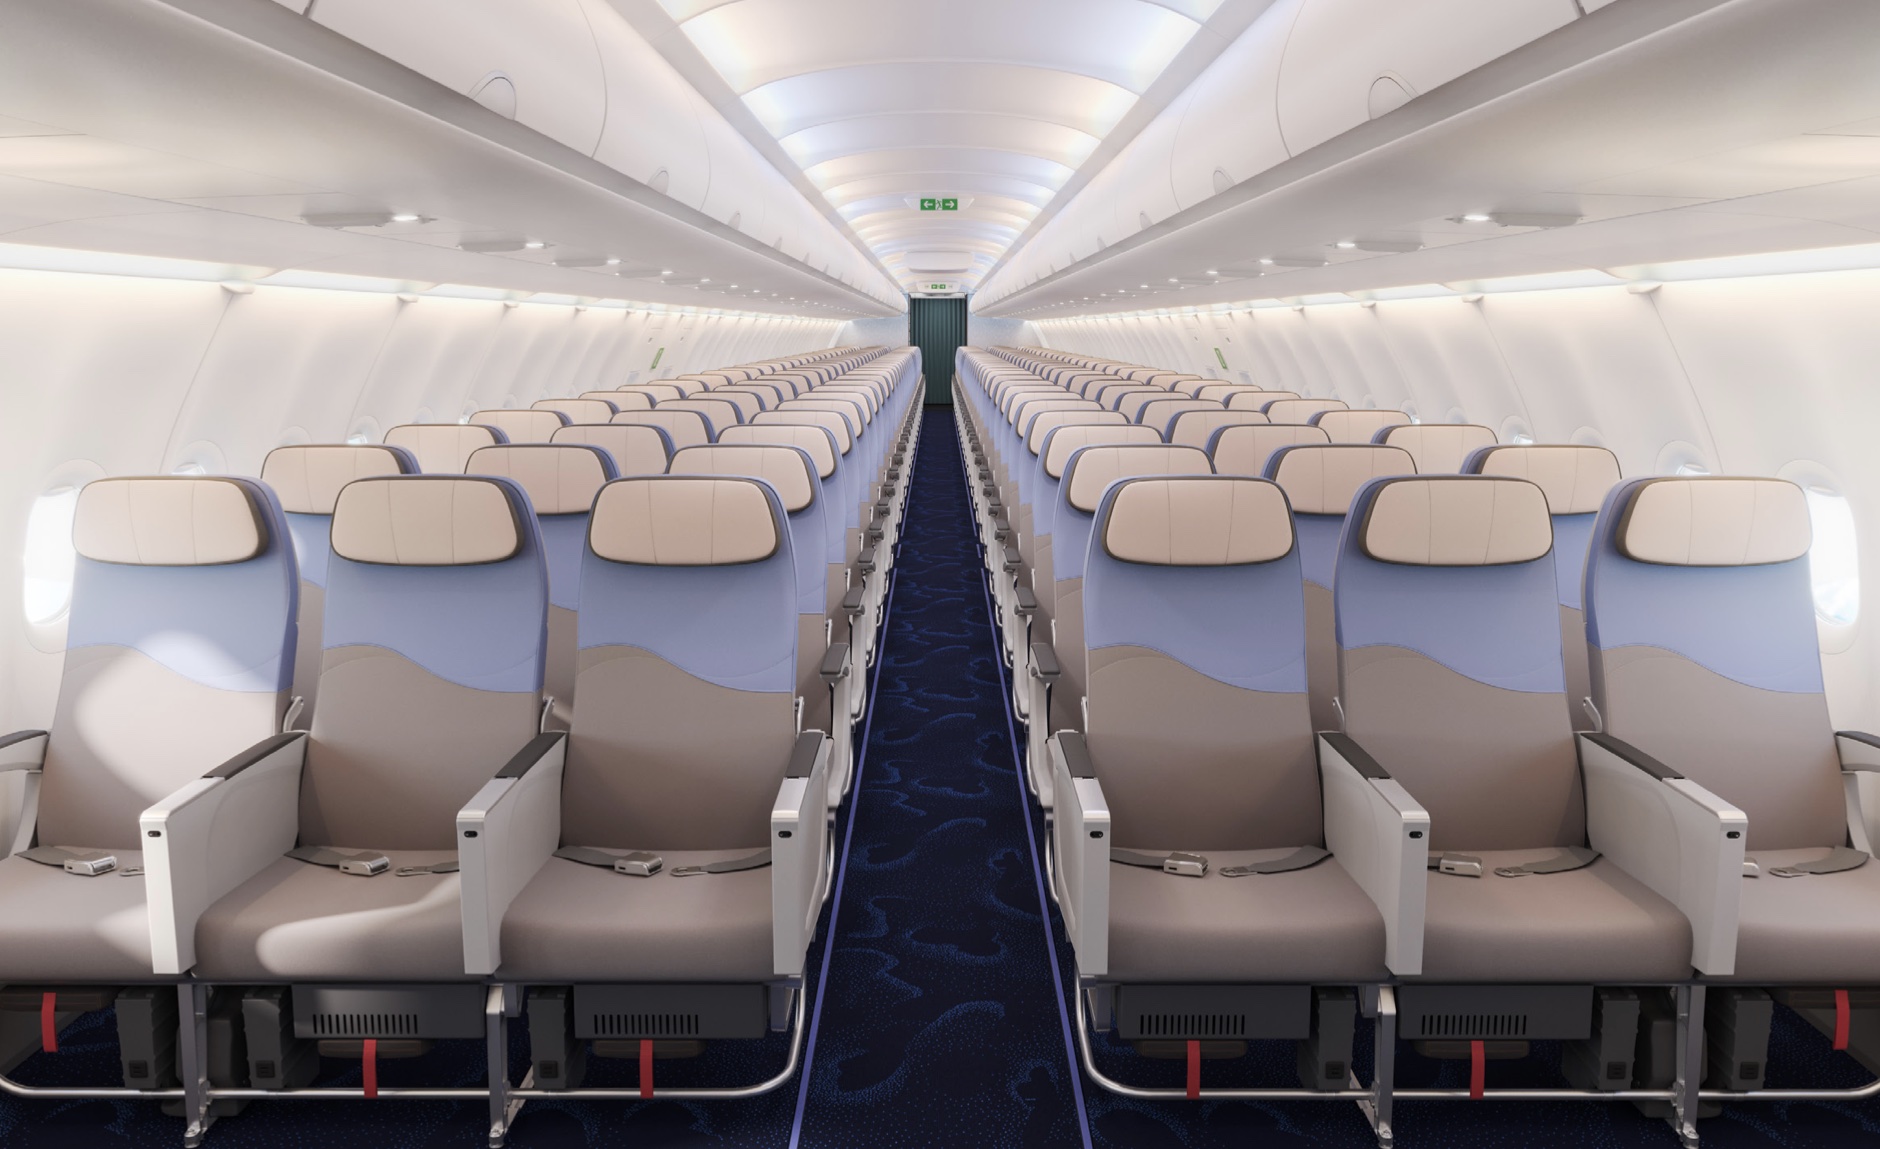 Preparing for travel demand in the post-Covid era, China Airlines will begin flying its new A321neo passenger aircraft on the Taipei (Songshan)-Tokyo (Haneda) route daily from July 1.